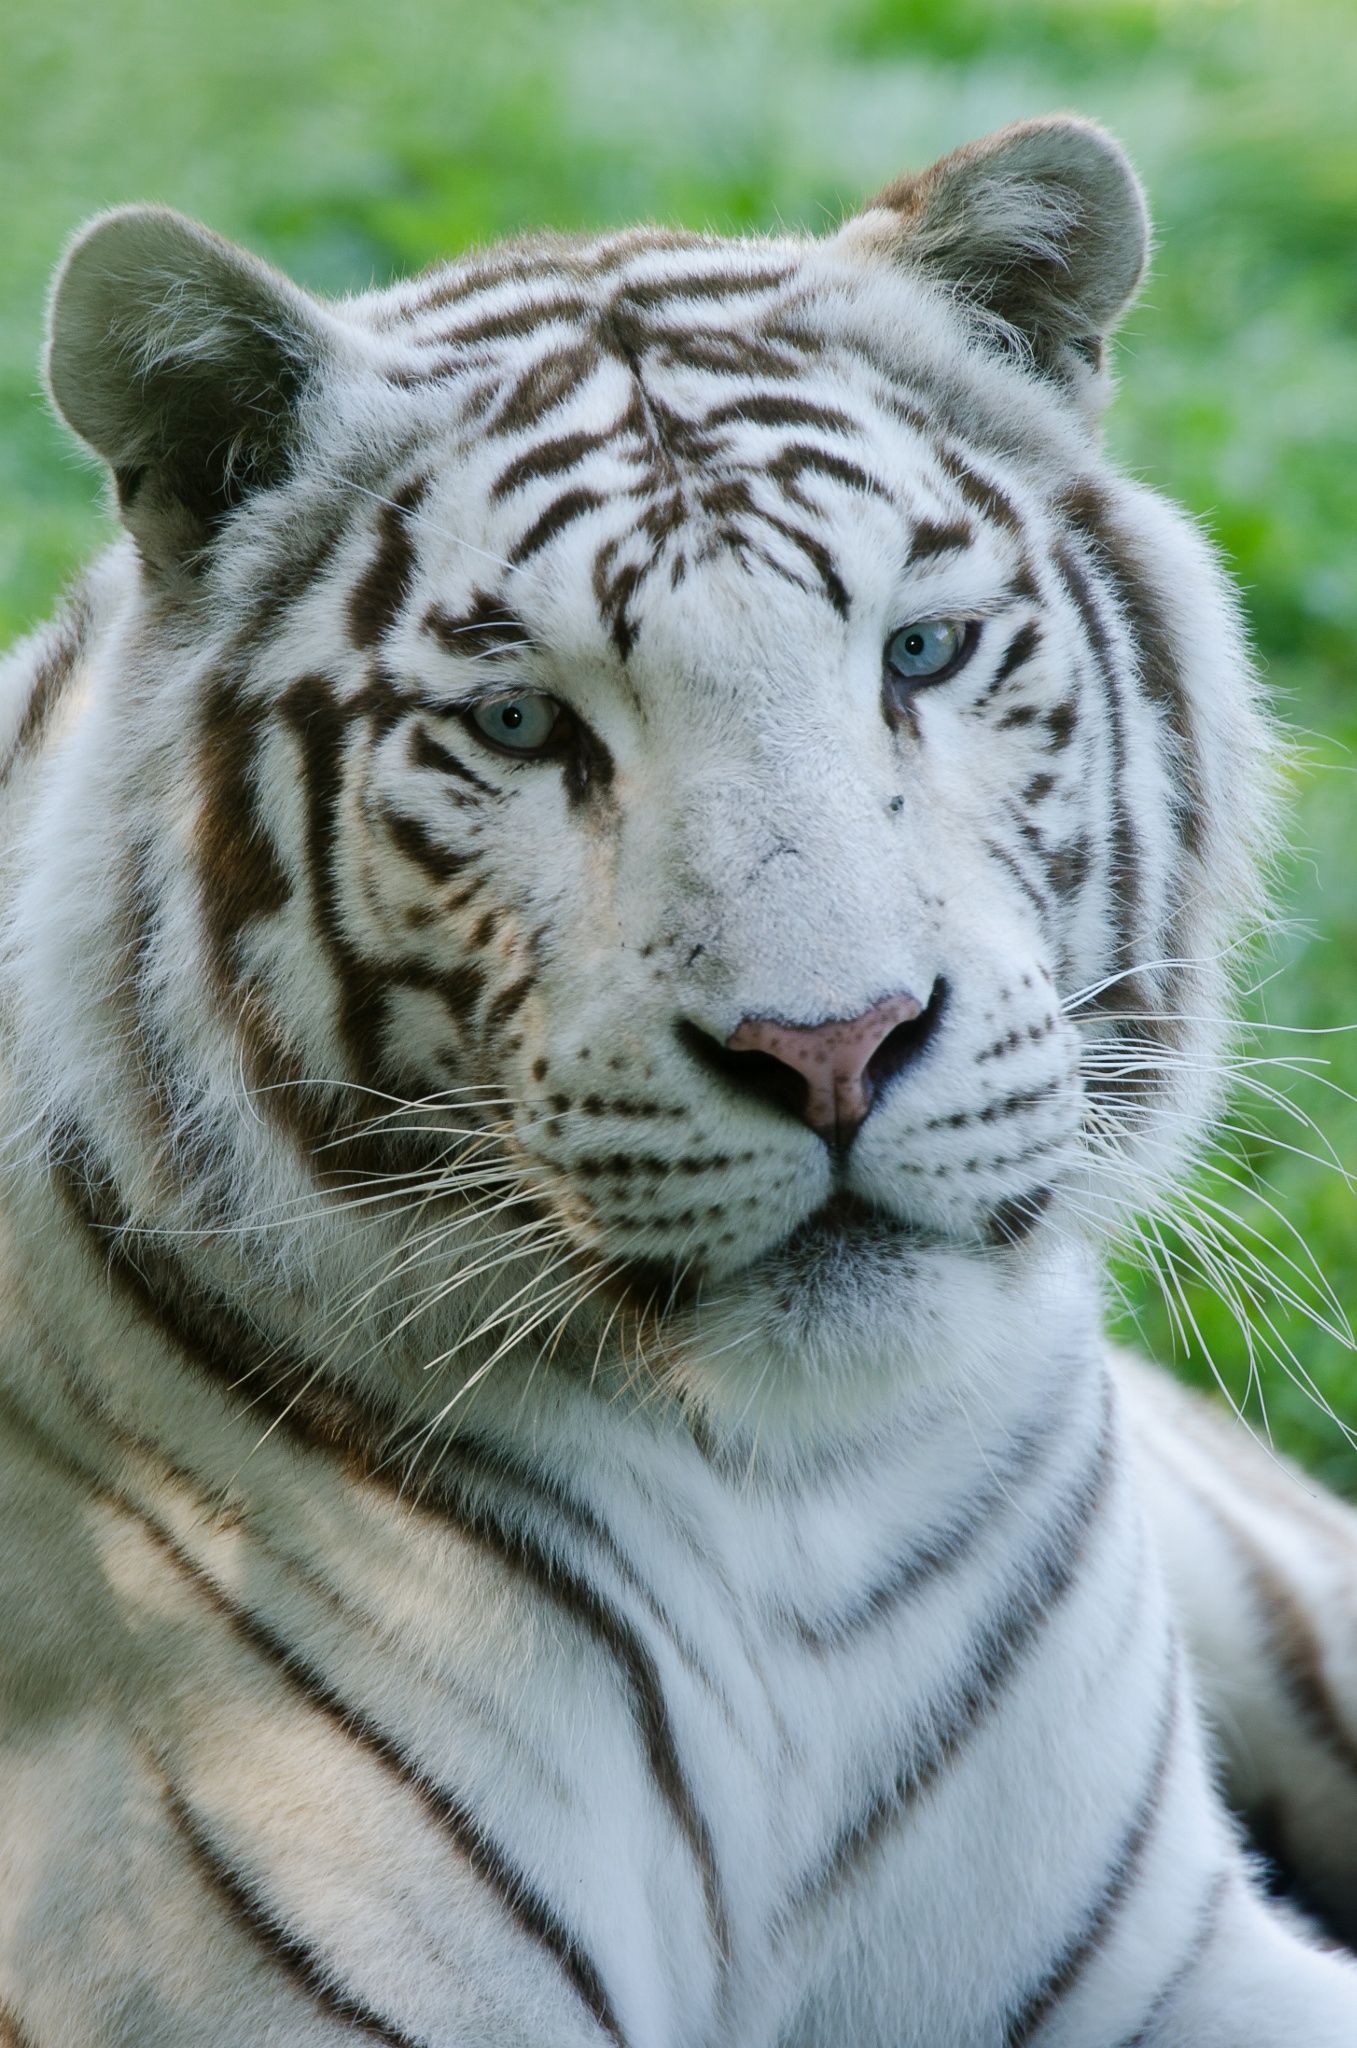 Pin by blonde on photography | Pinterest | Blue eyes, Tigers and Eye